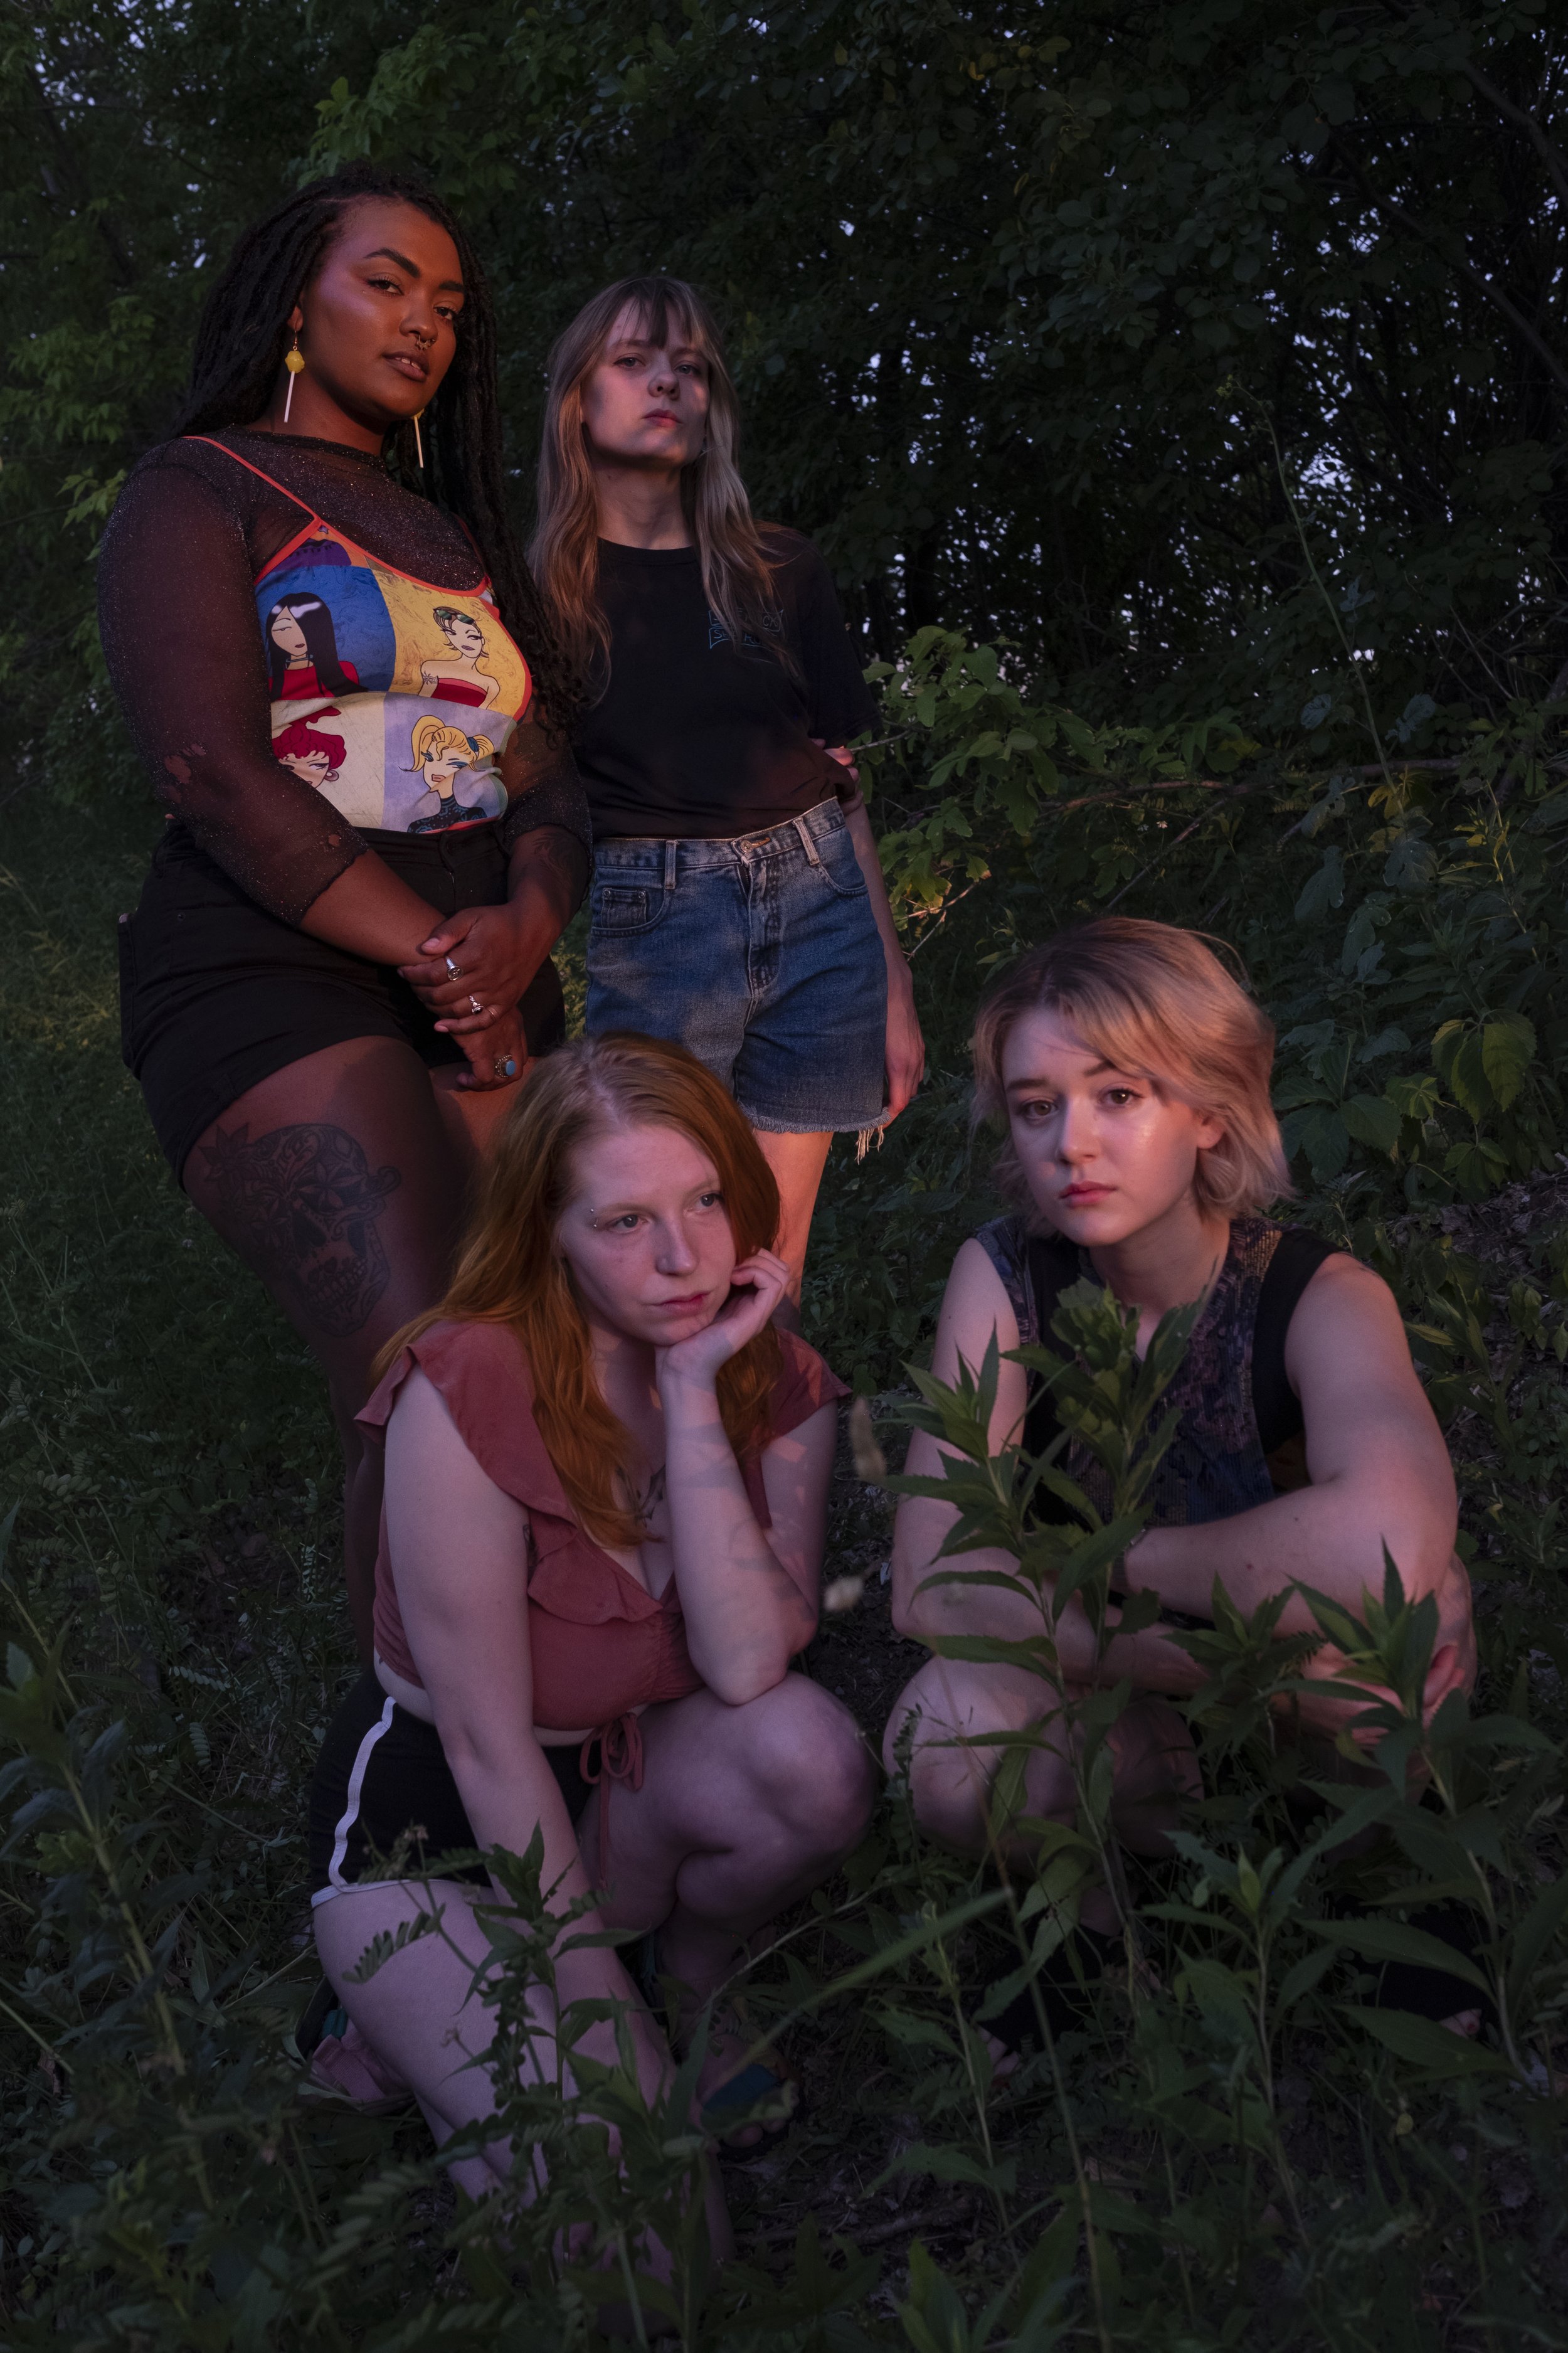  Clockwise from left: Nadirah, Emily, Natalie and Kathy of the Minneapolis band Gully Boys, outside of their studio in St. Paul on Thursday, June 24th, ahead of their first show since the pandemic. The band will perform at a Pride block party at the 